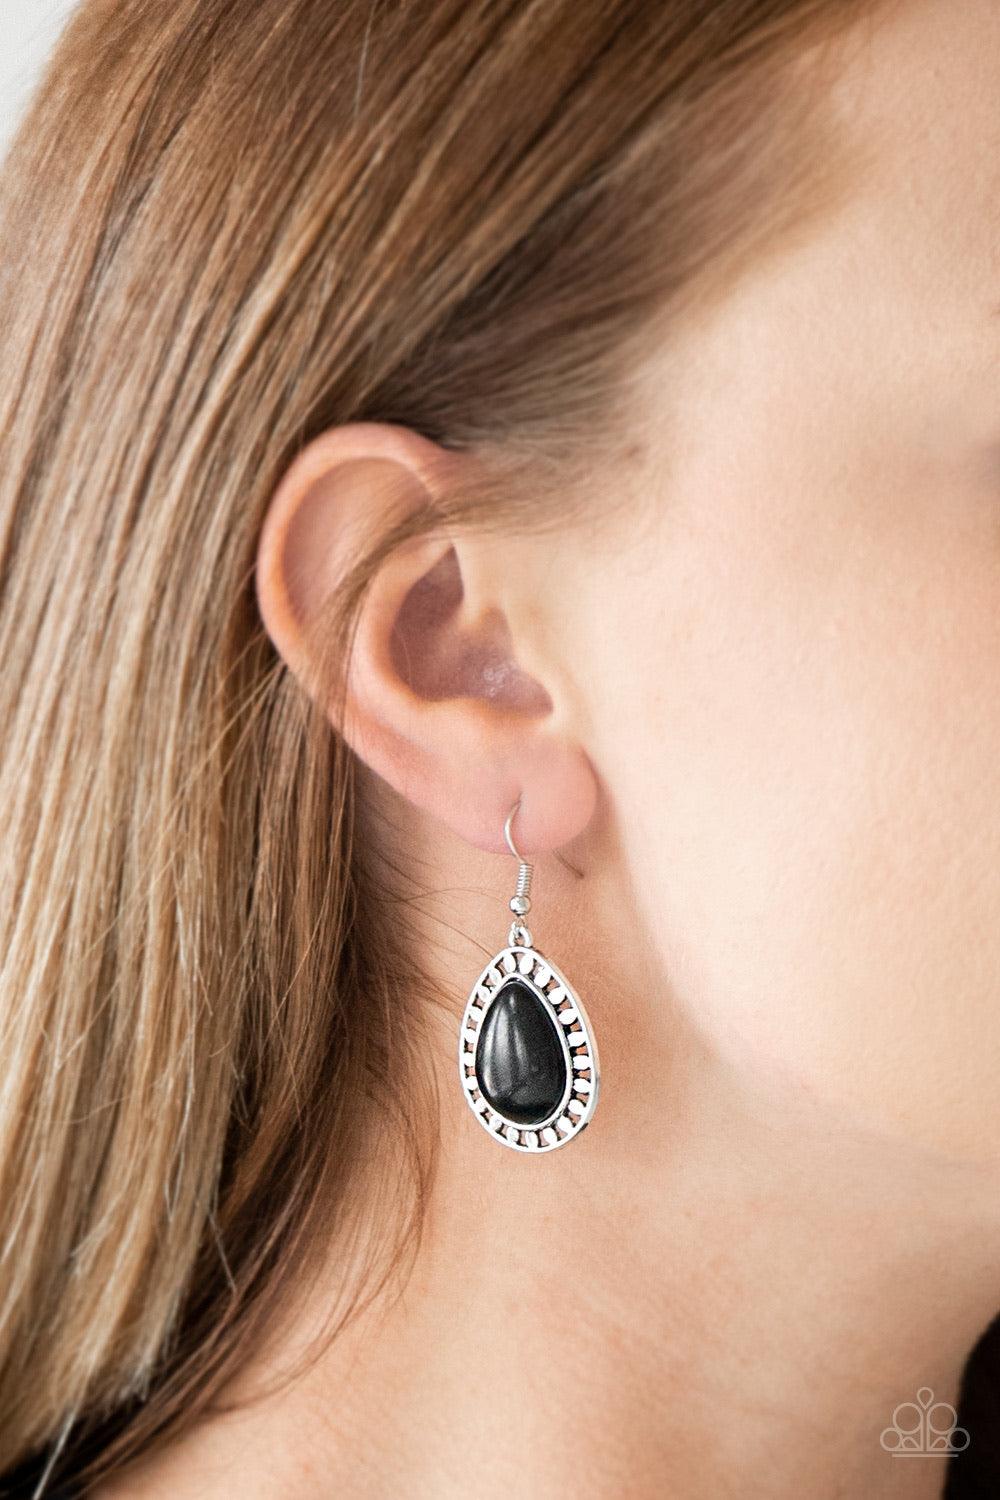 Paparazzi Accessories Sahara Serenity - Black Chiseled into a tranquil teardrop, a smooth black stone is pressed into a shimmery silver frame radiating with tribal inspired textures for a seasonal look. Earring attaches to a standard fishhook fitting. Sol